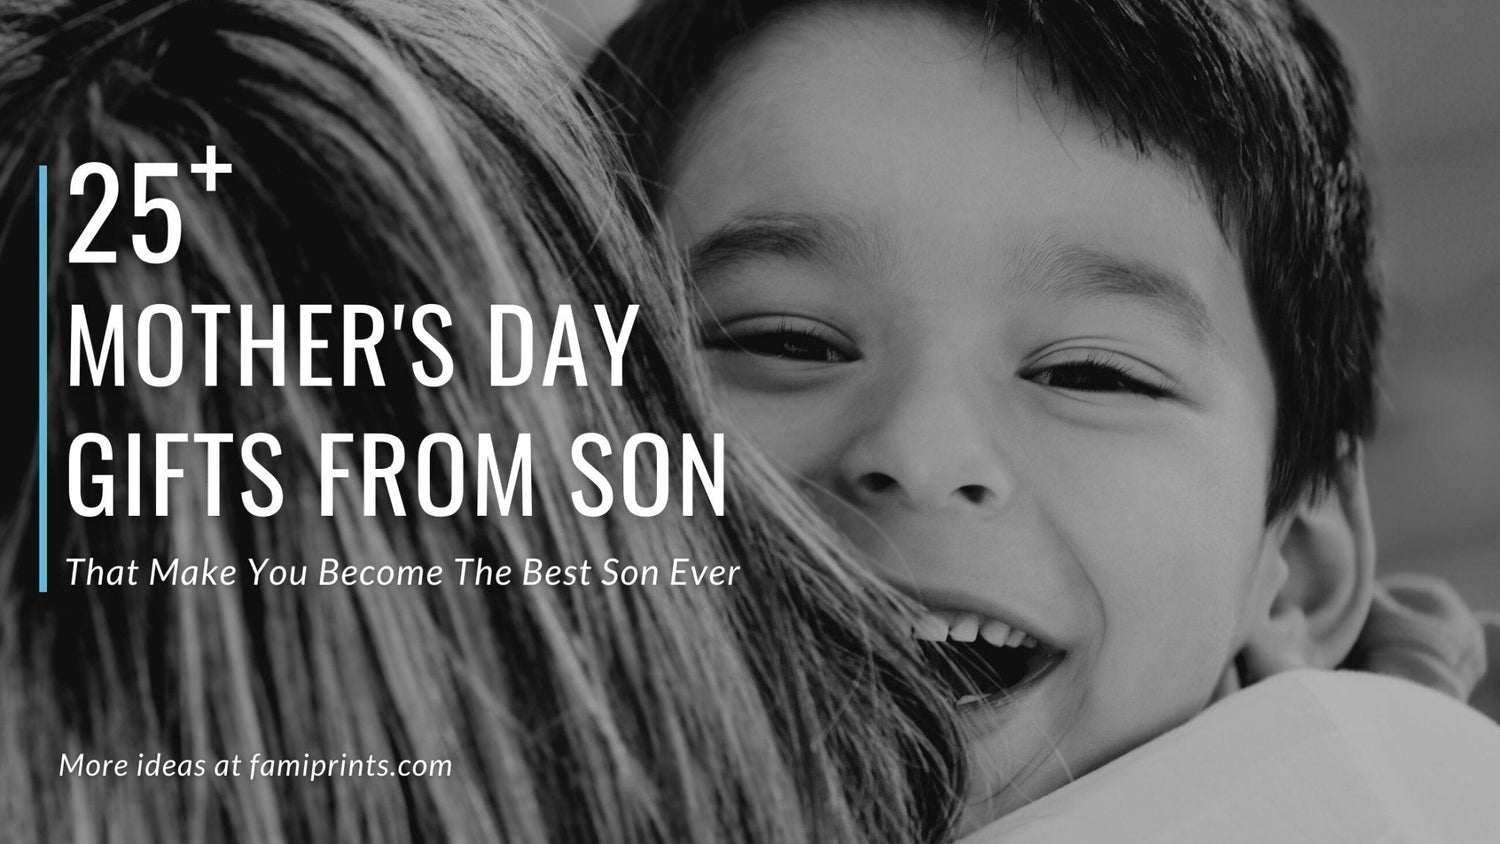 https://famiprints.com/cdn/shop/articles/25-best-mothers-day-gifts-from-son-that-make-you-become-the-best-son-ever-2022-515153.jpg?v=1659863414&width=1500